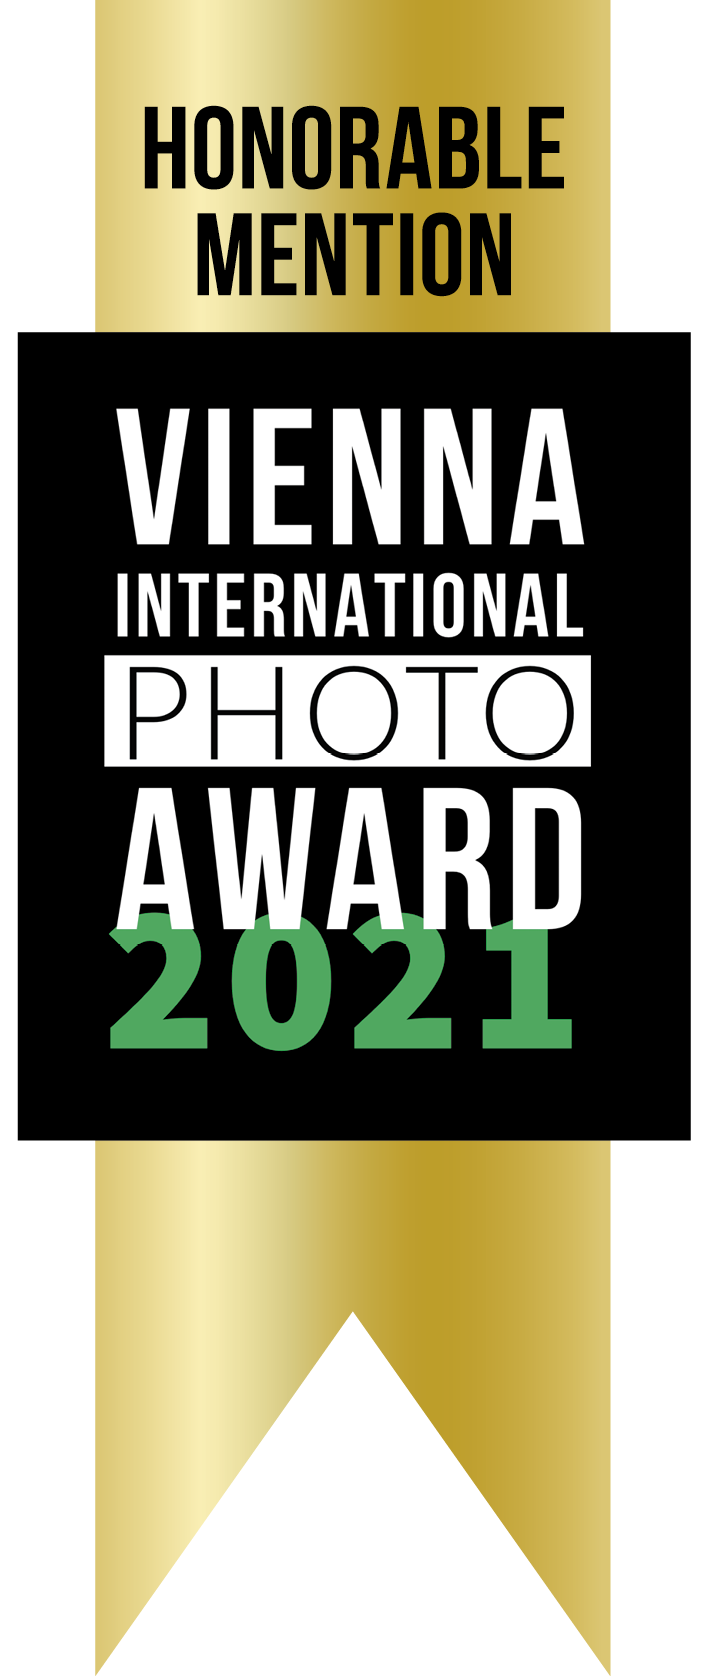 Honorable Mention in VIEPA Awards 2021